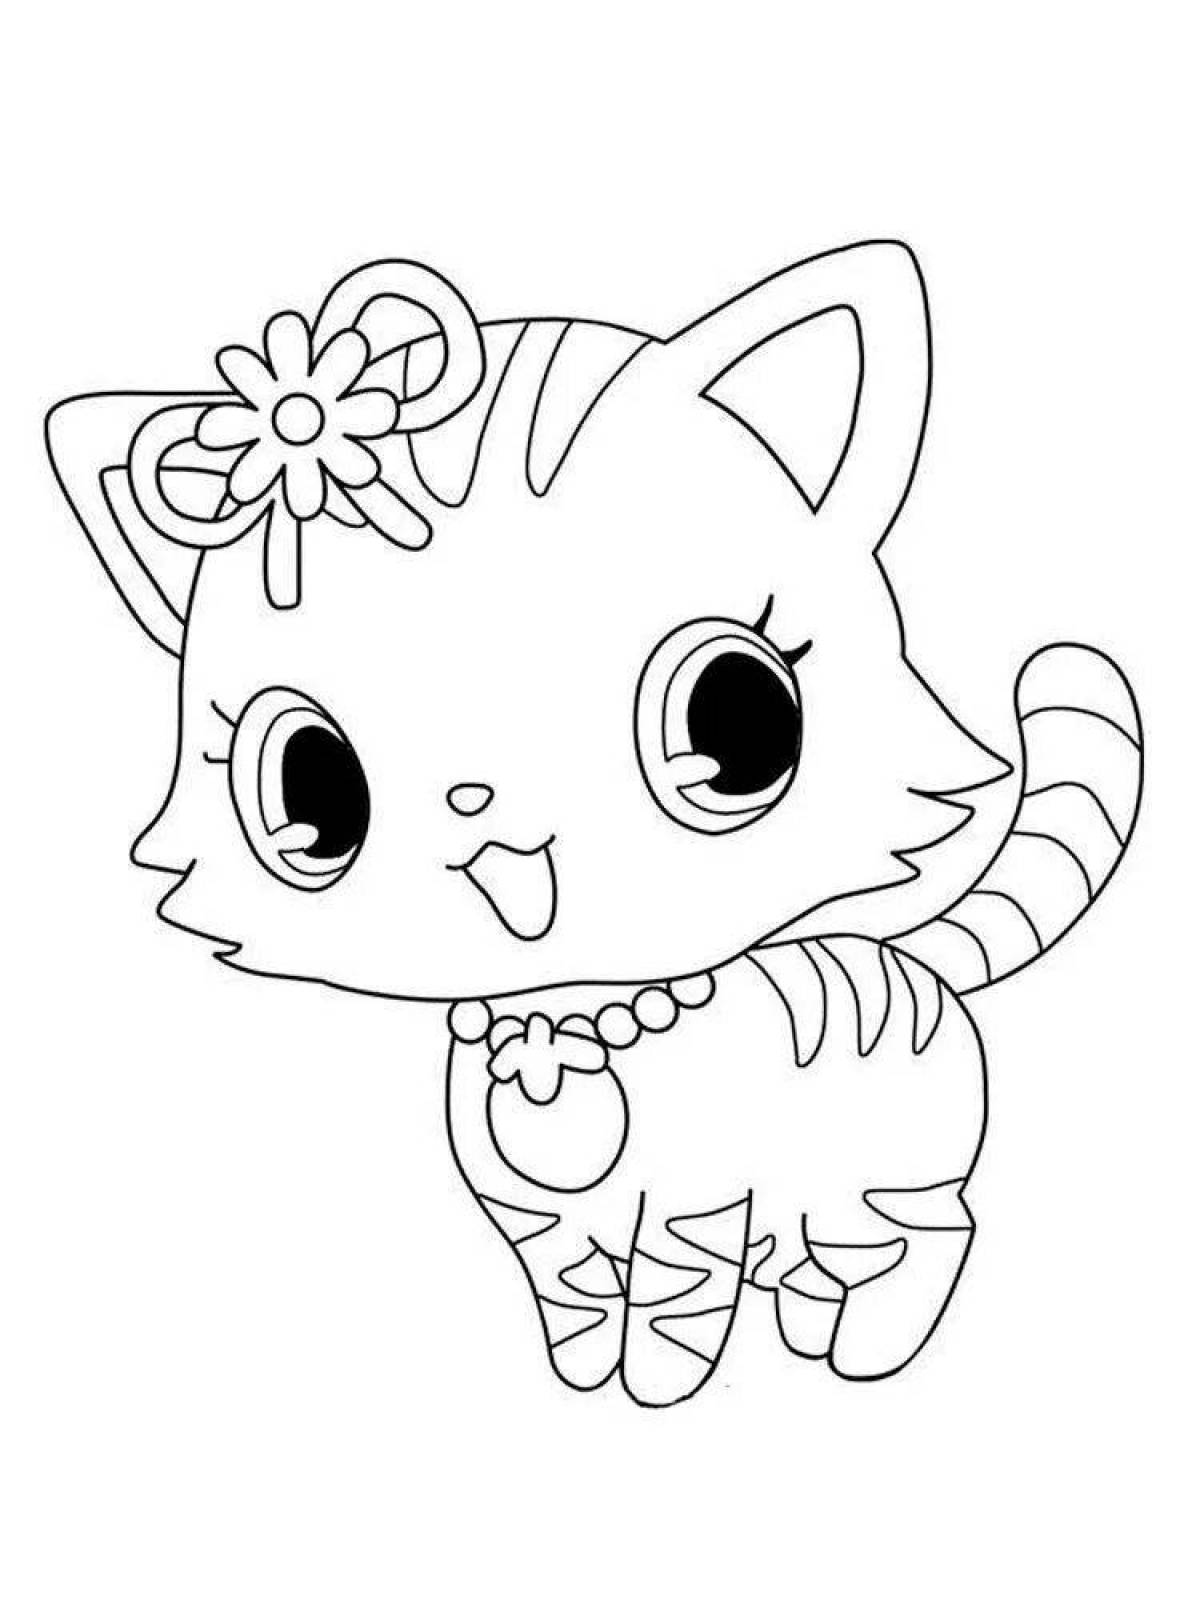 Awesome pussy coloring page